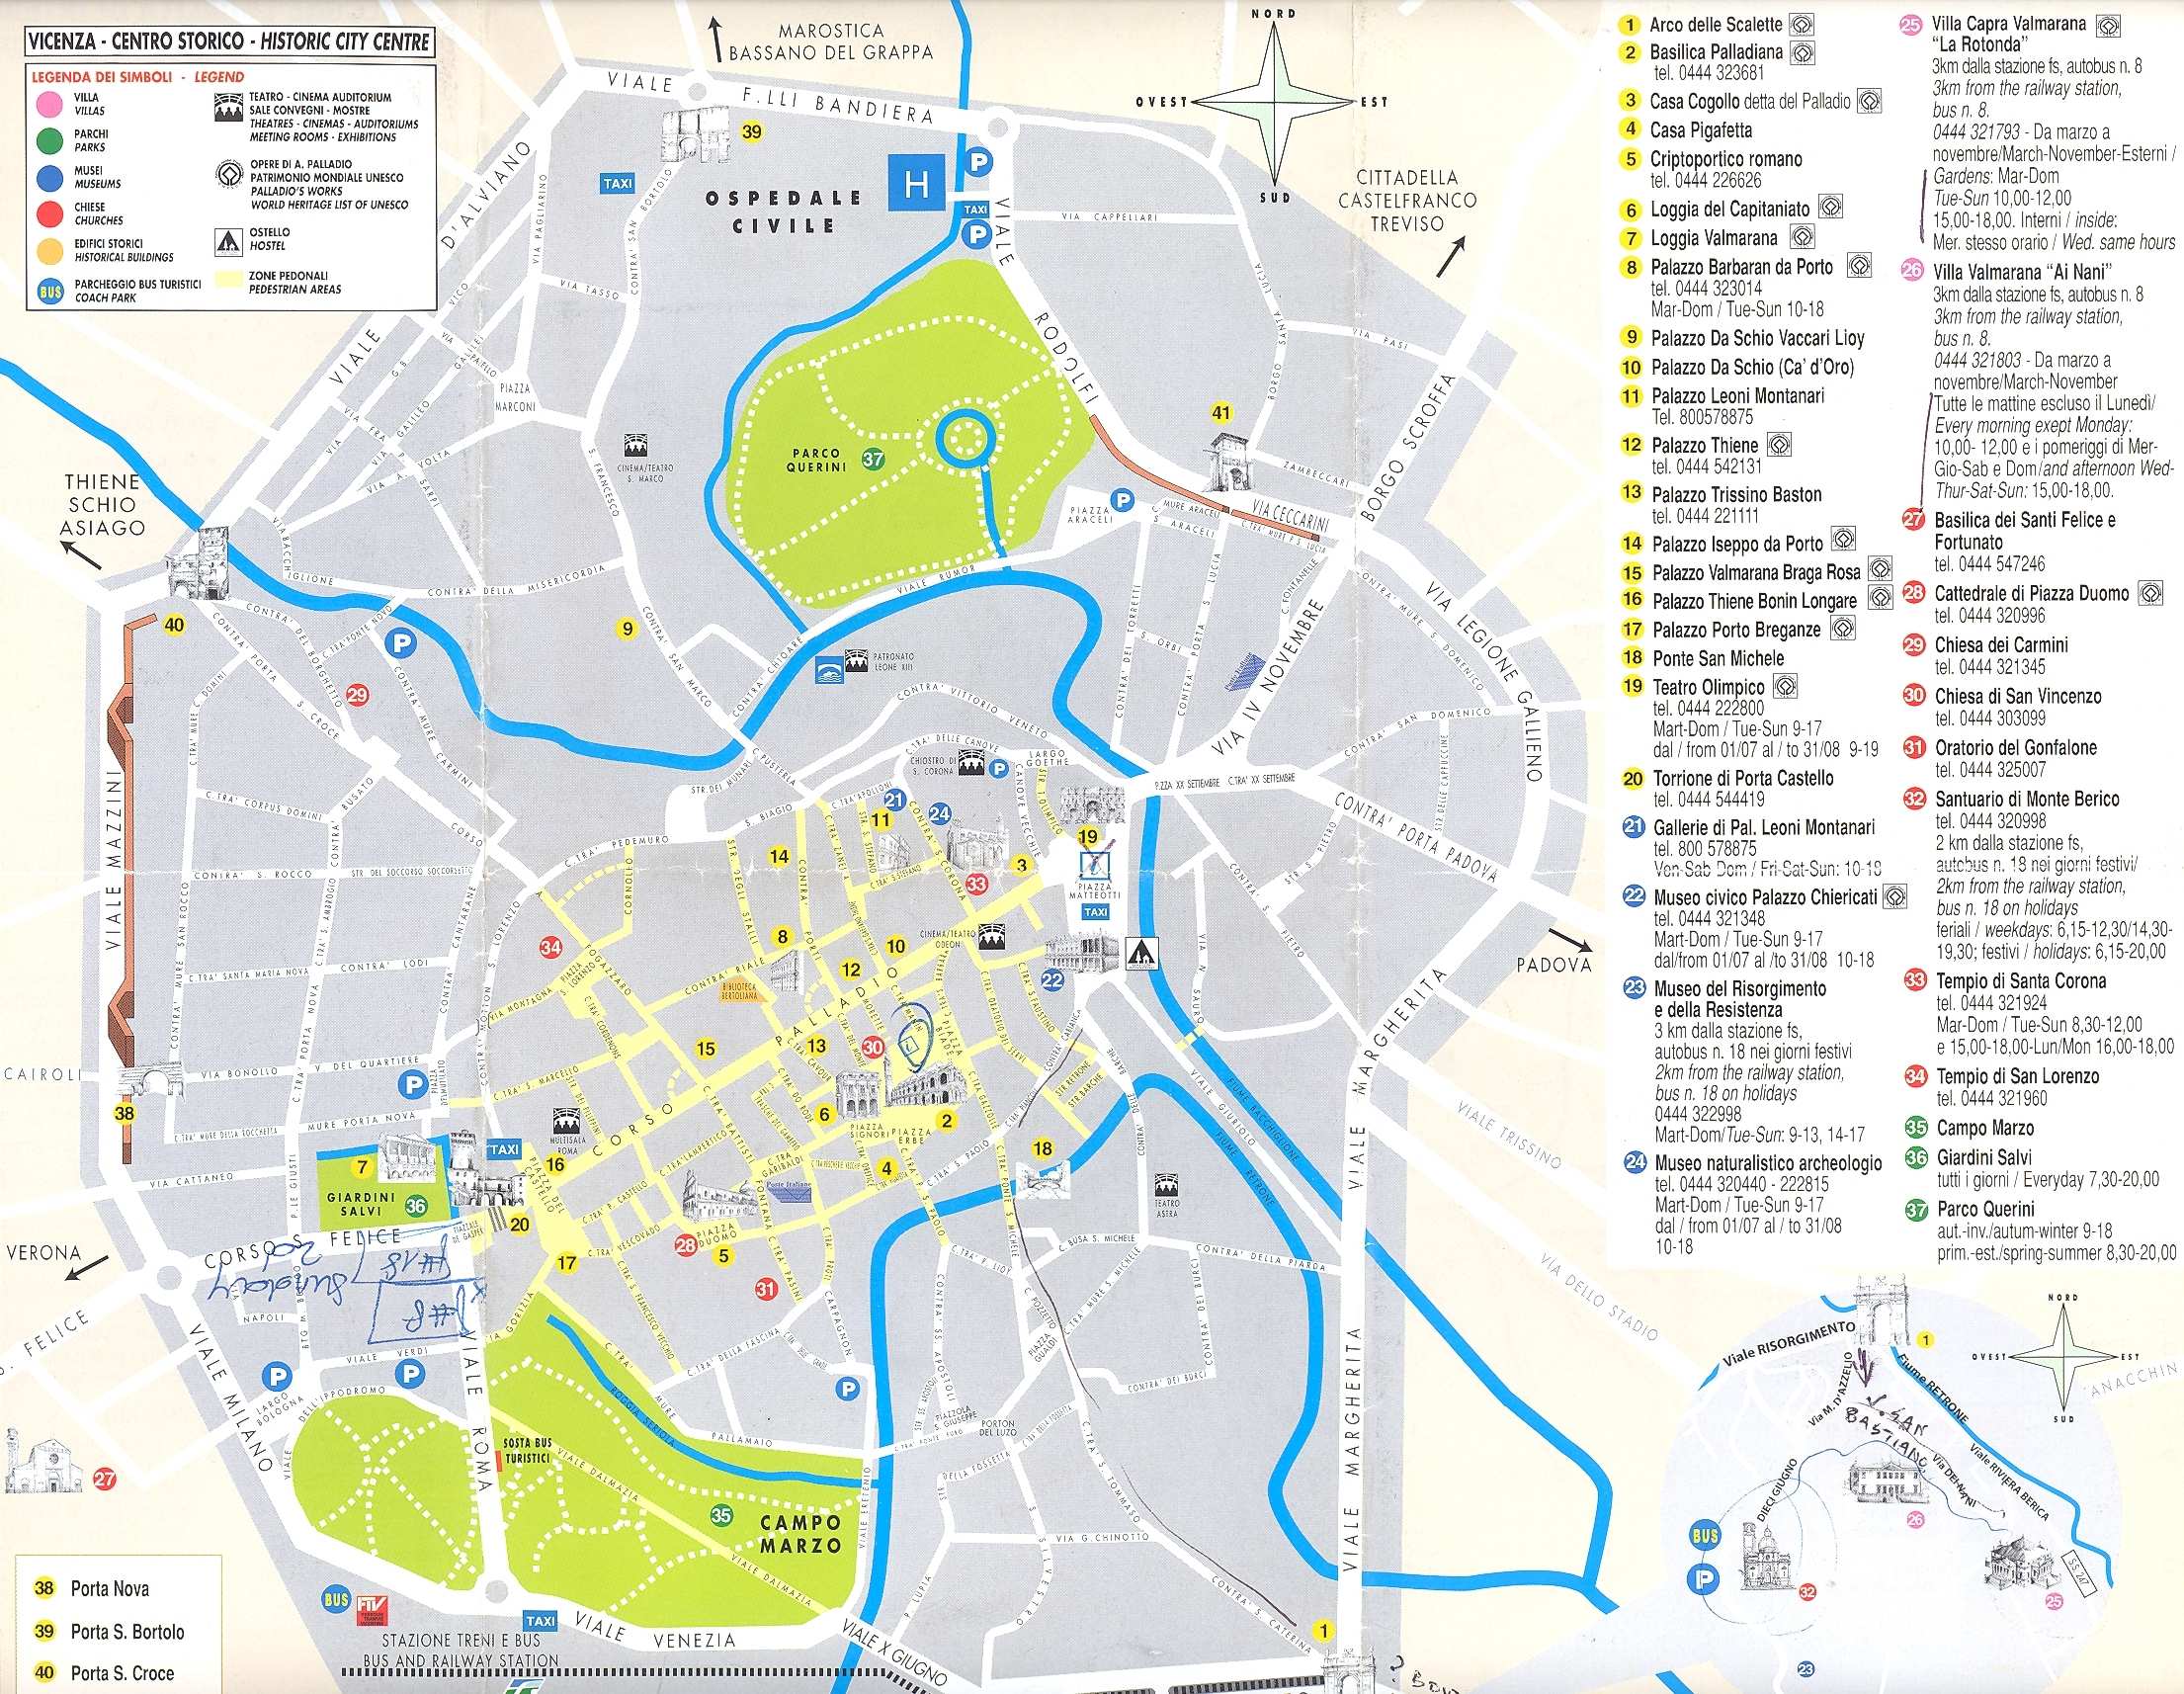 tourist map of vicenza